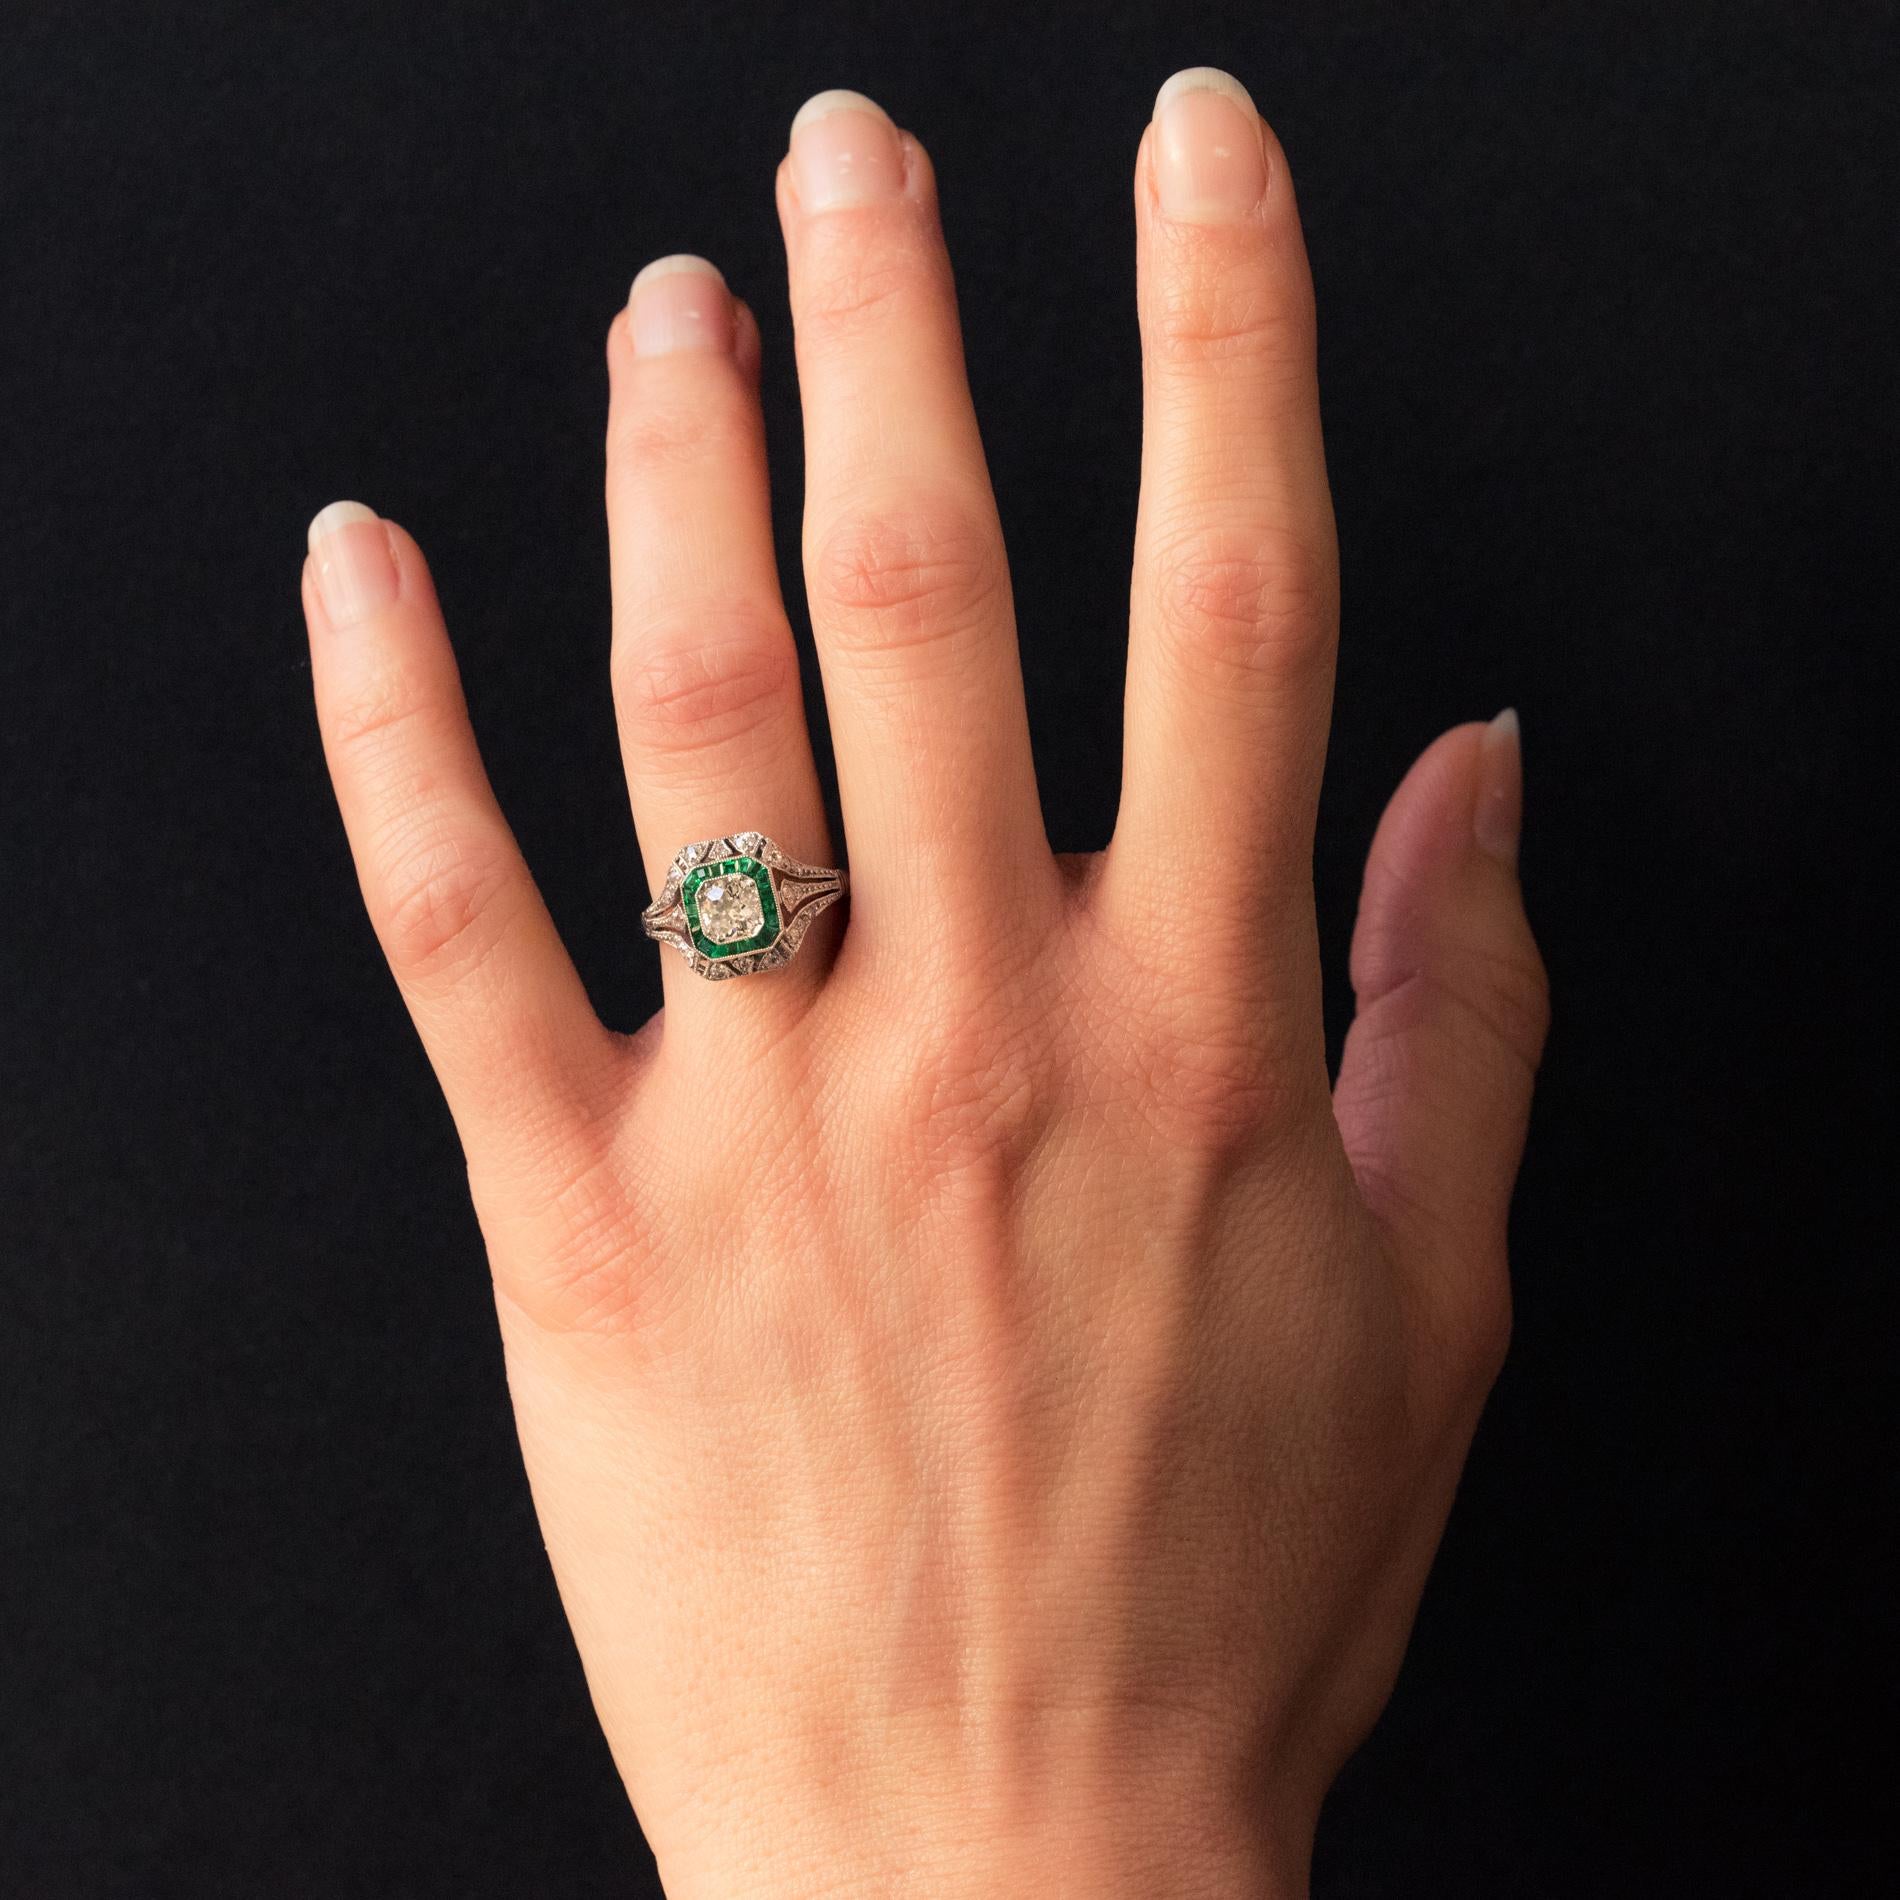 Ring in platinum.
Delicate antique ring from the Art Deco period, it is set on its top with an antique brilliant-cut diamond in a hexagonal millegrain decor and surrounded by a row of calibrated emeralds. The platinum setting is perforated and set